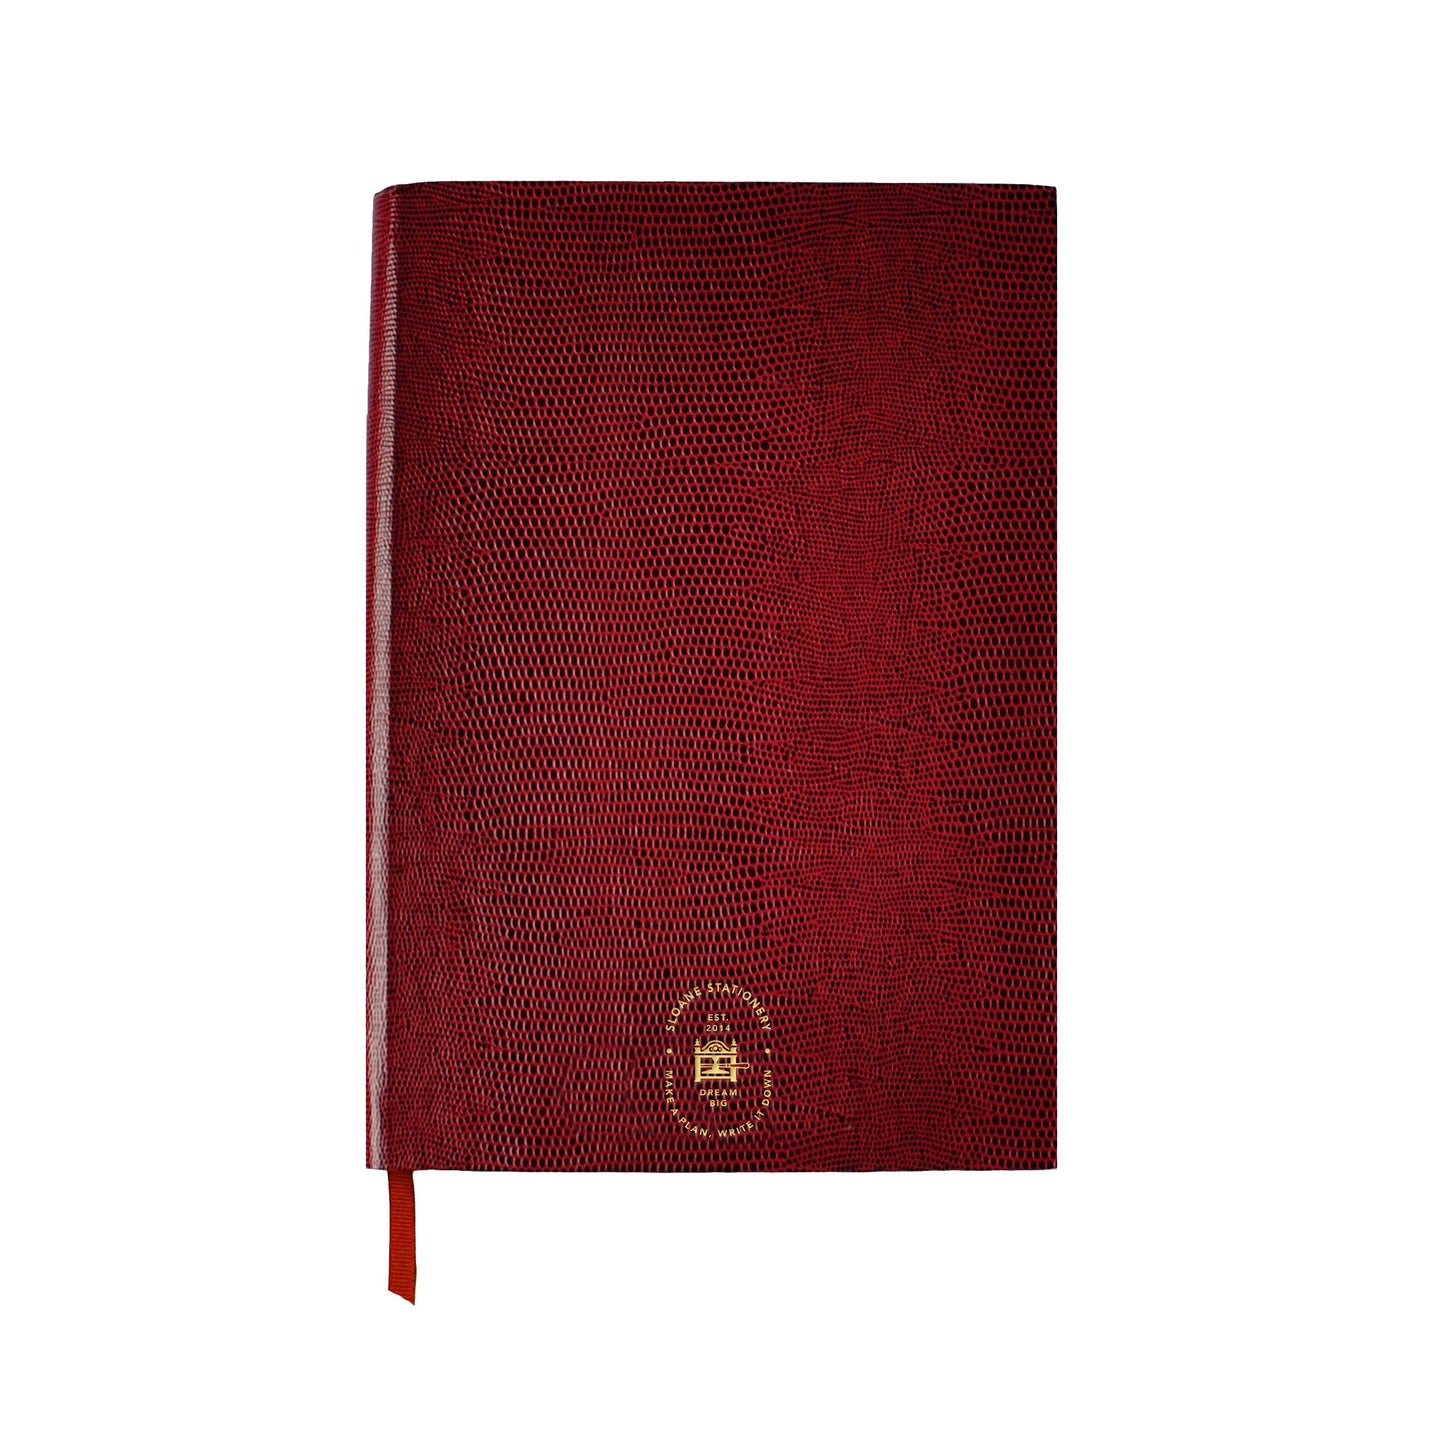 Hardcover Notebook - MONKEY BUSINESS